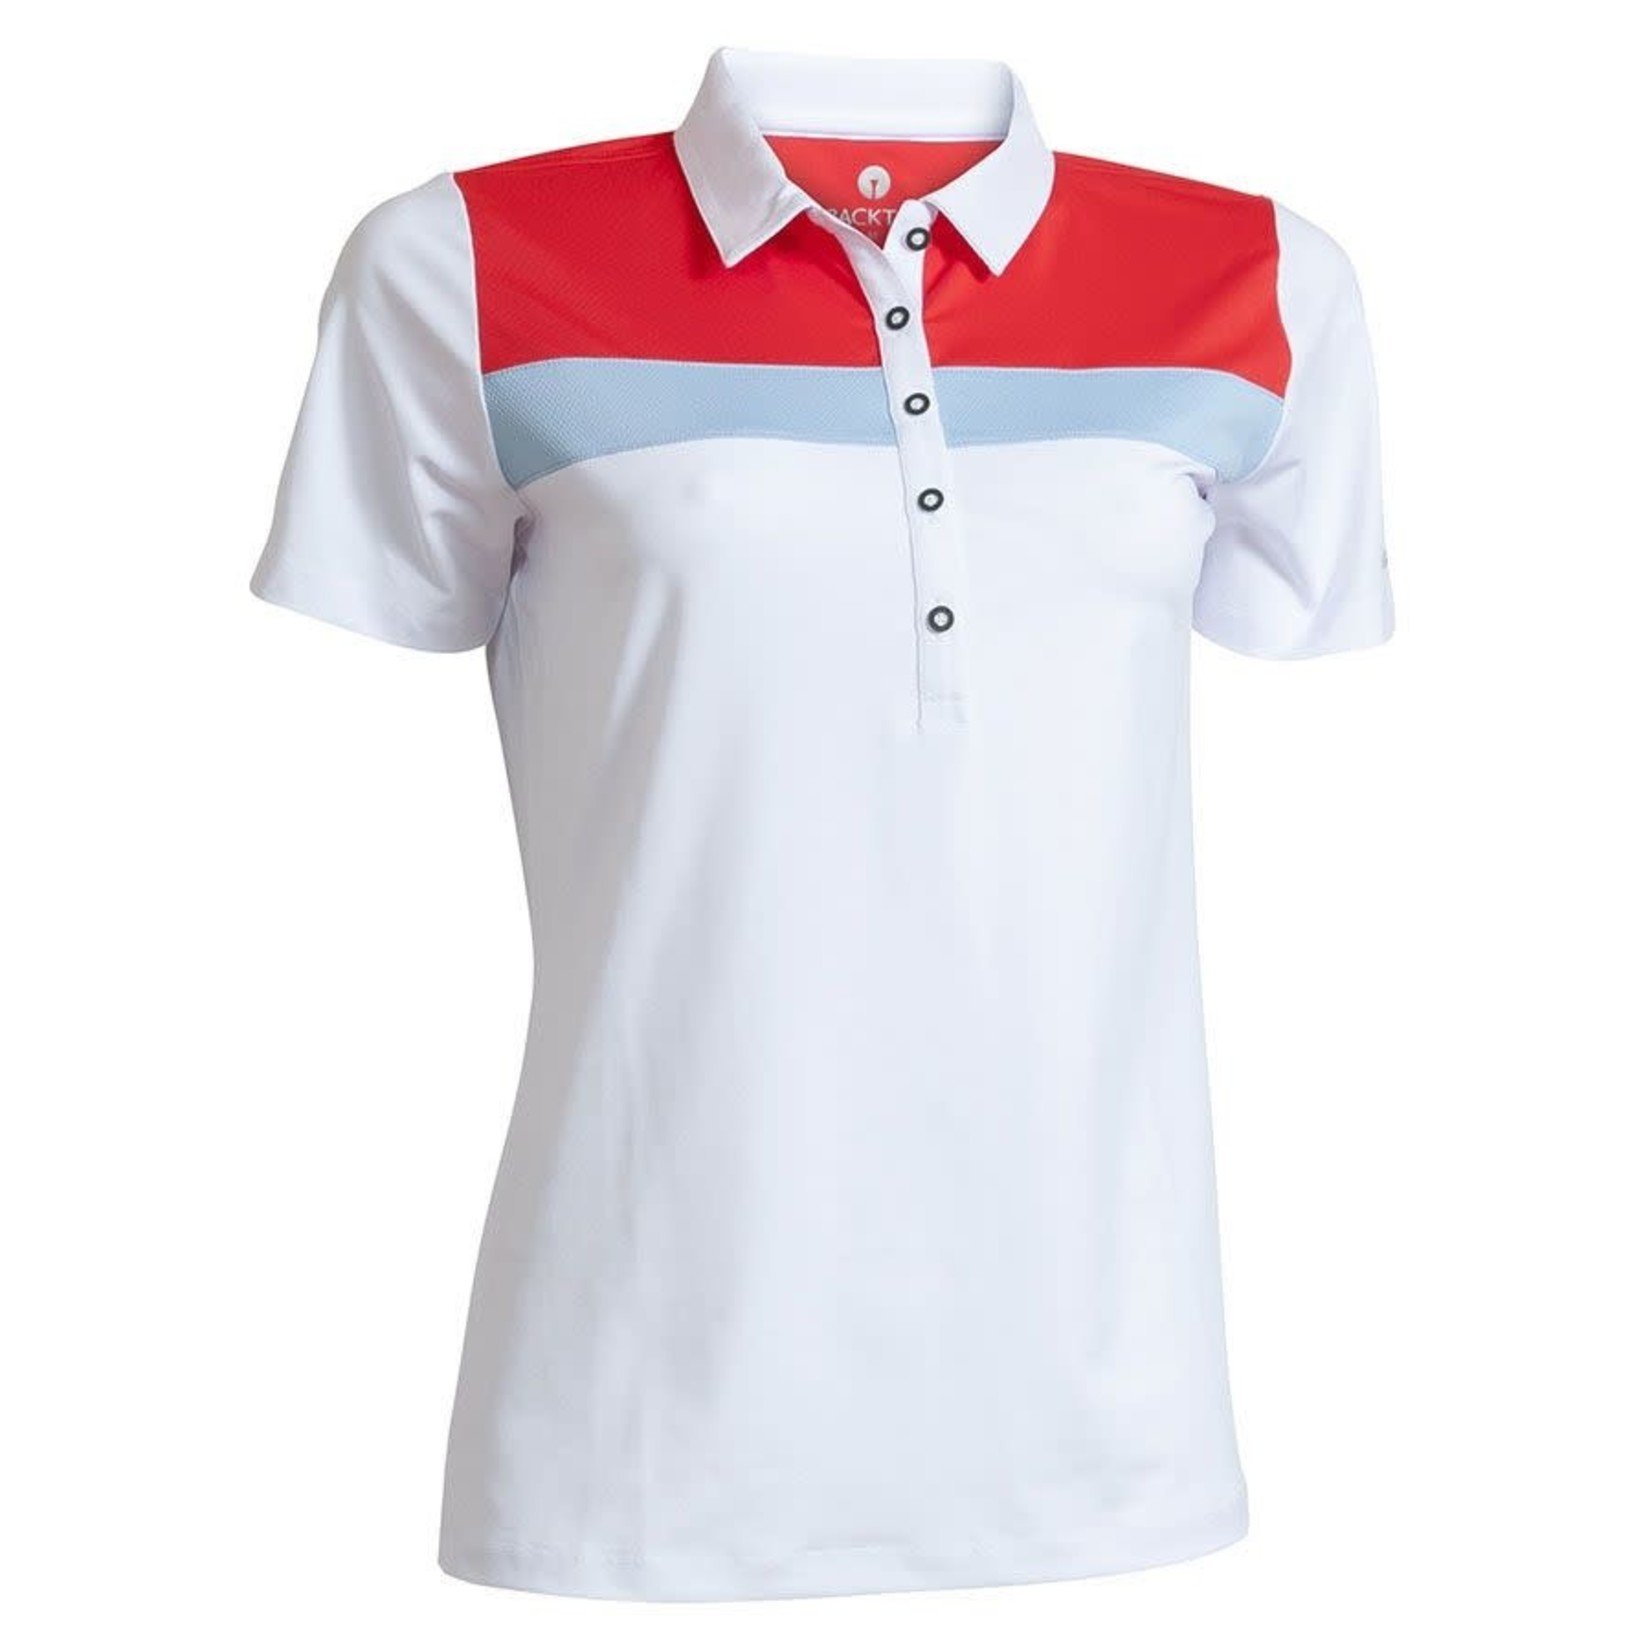 Backtee Backtee Ladies Sports Qd Uv Polo wit/rood/lblauw S